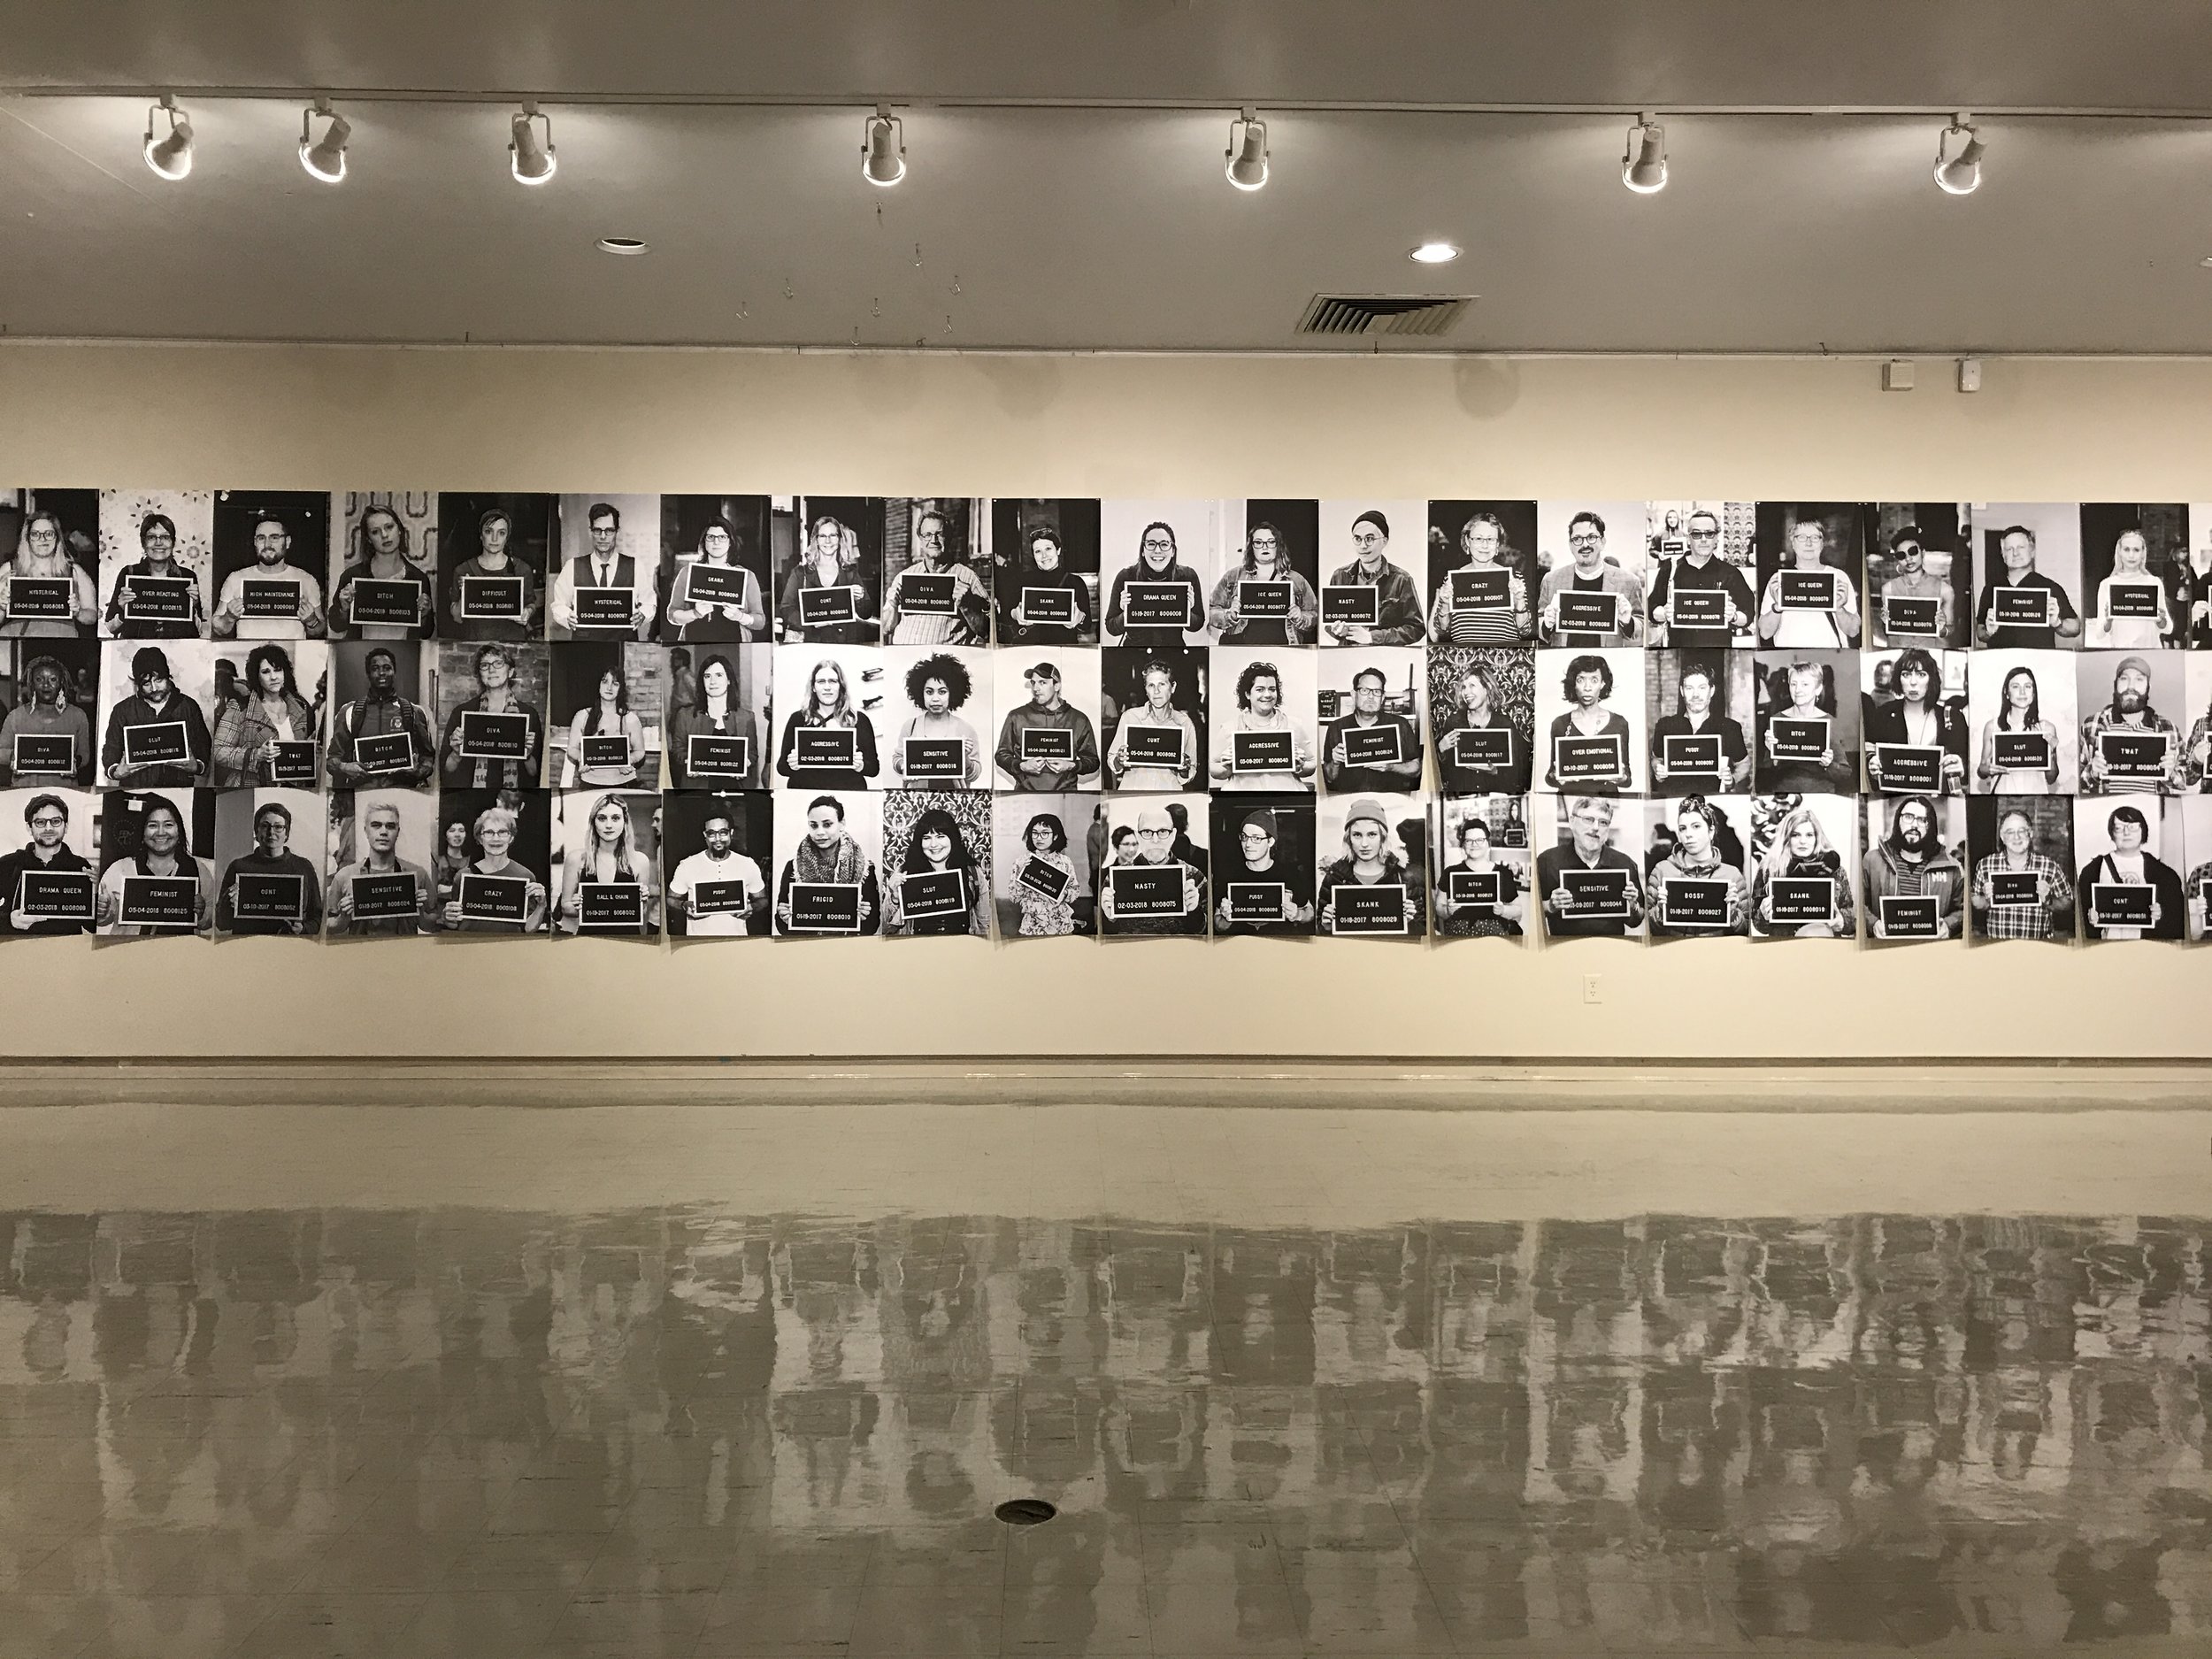  Documentation of how mugshots from previous iterations of this performance were displayed in our solo exhibition  The Pervasive Curse  at the University of Wisconsin-Whitewater’s Crossman Gallery in Spring 2019. 